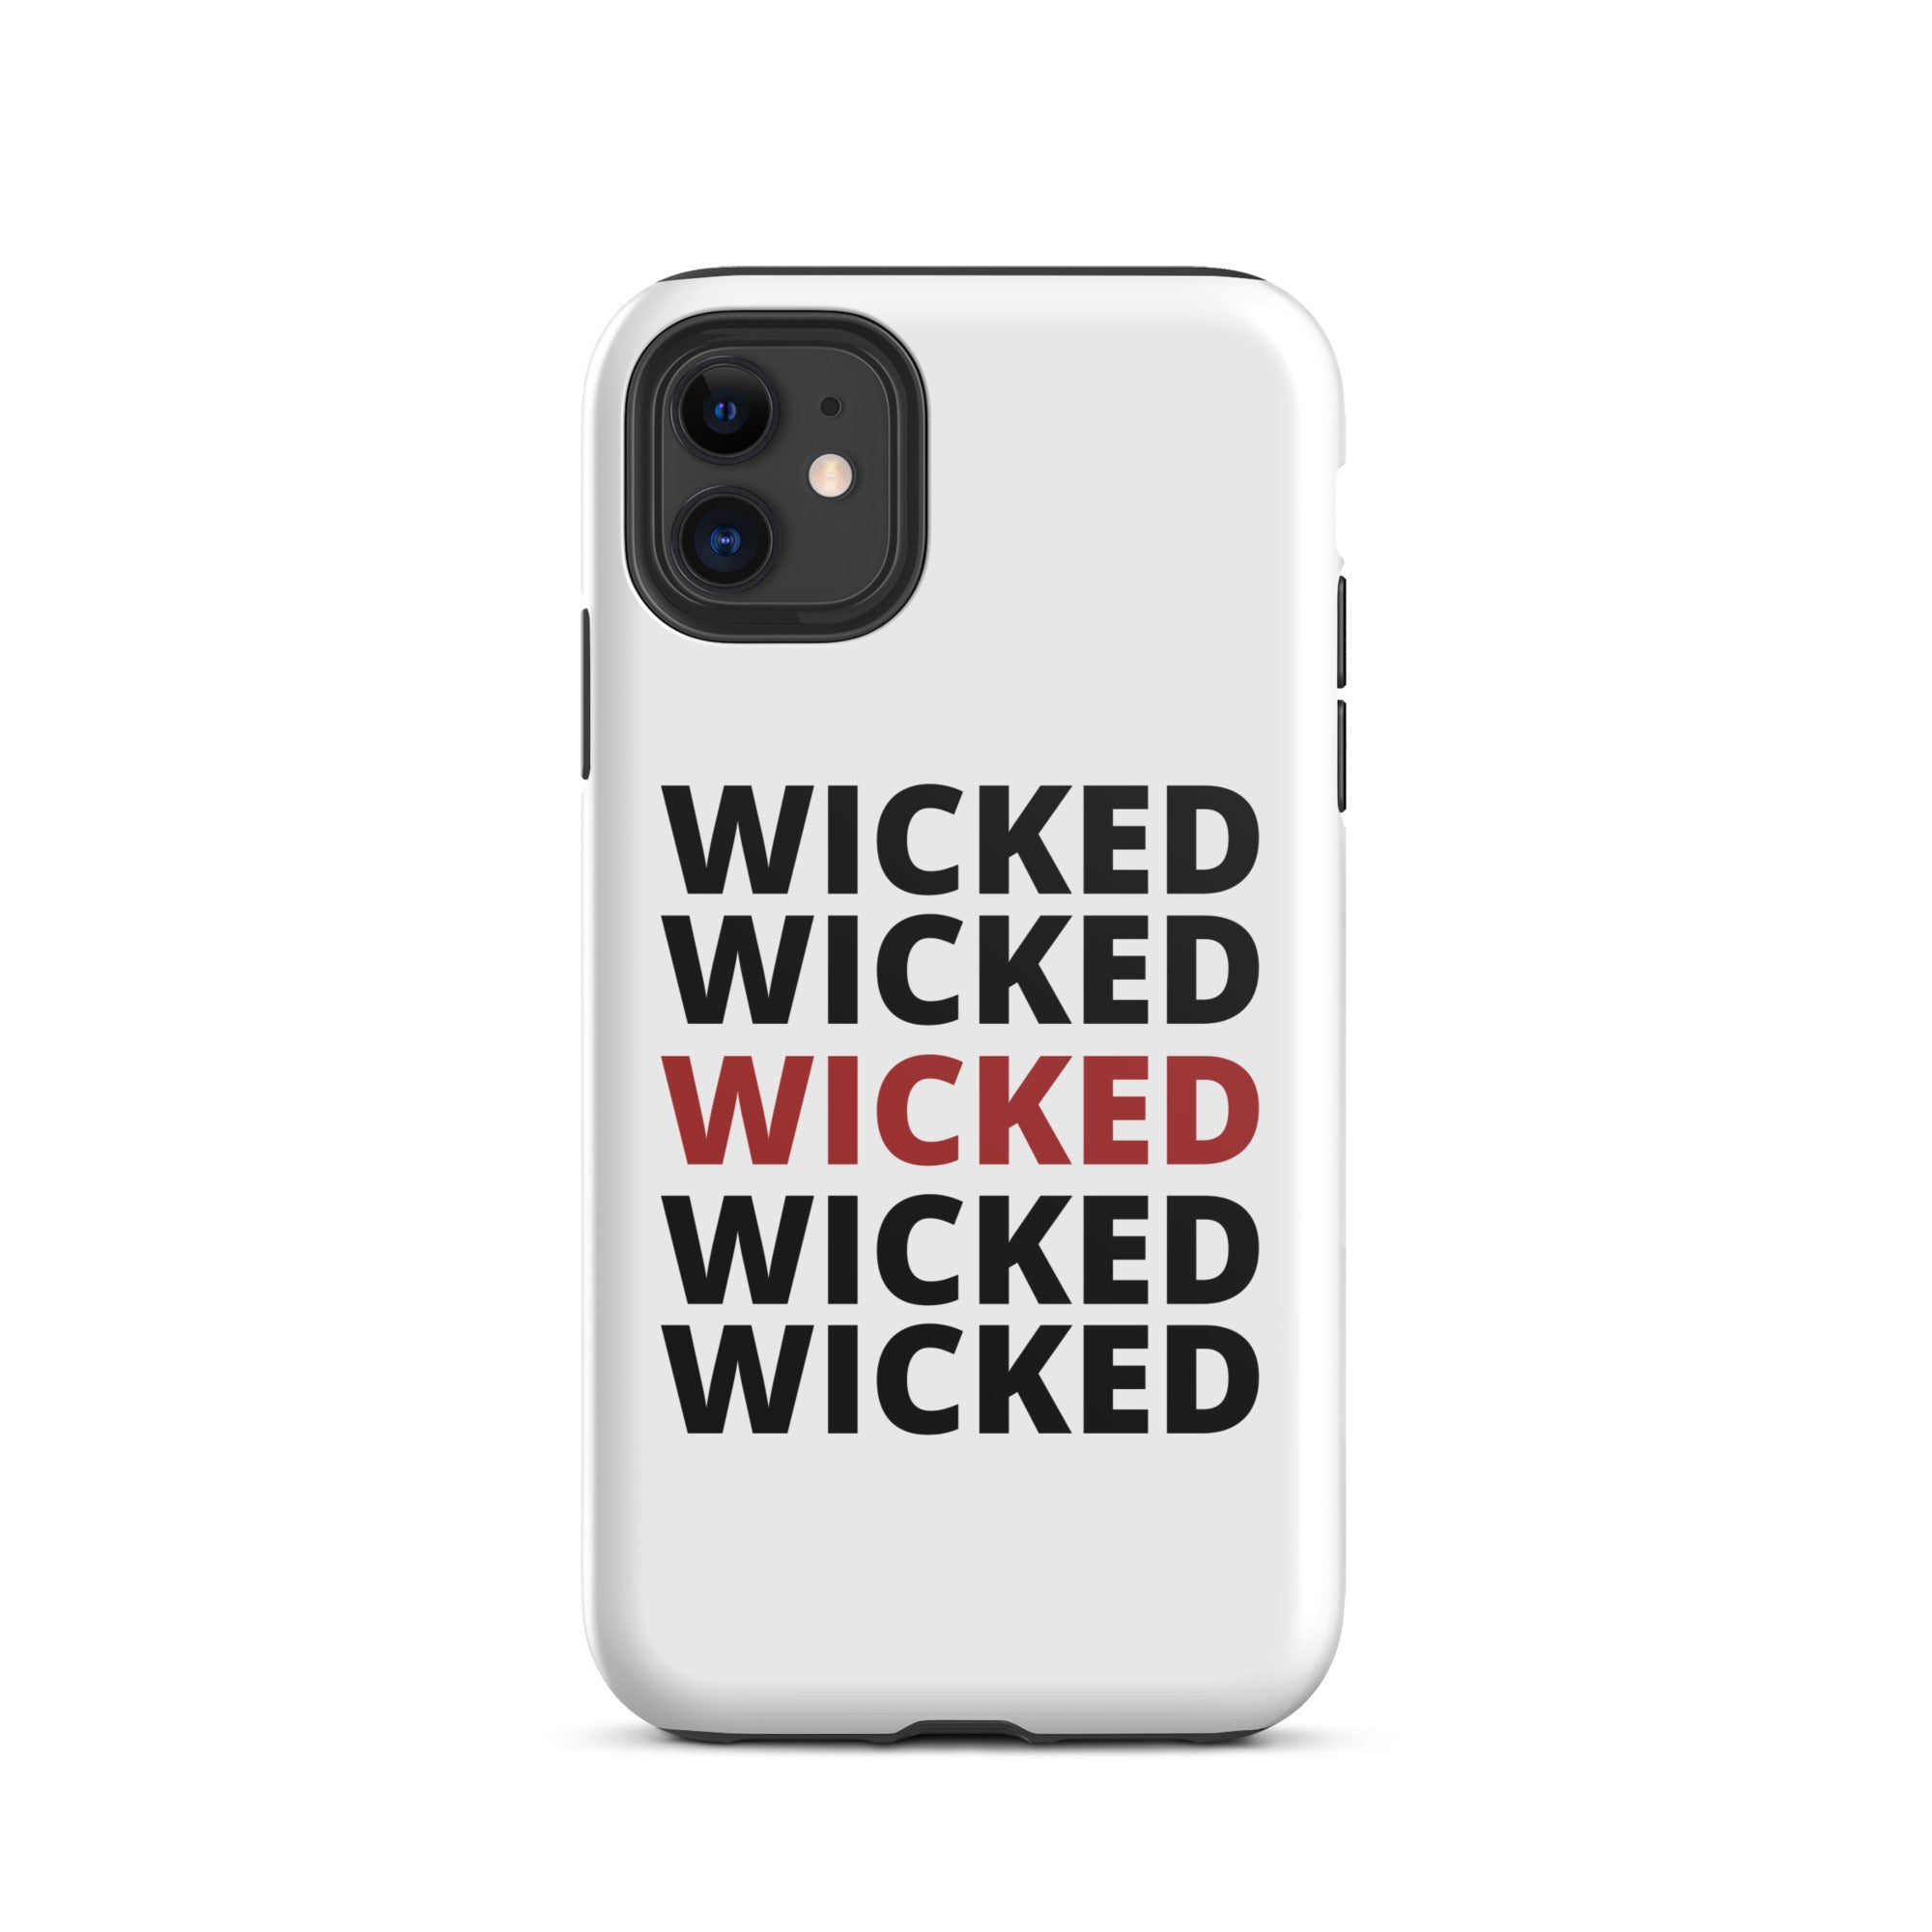 Wicked - Tough iPhone case